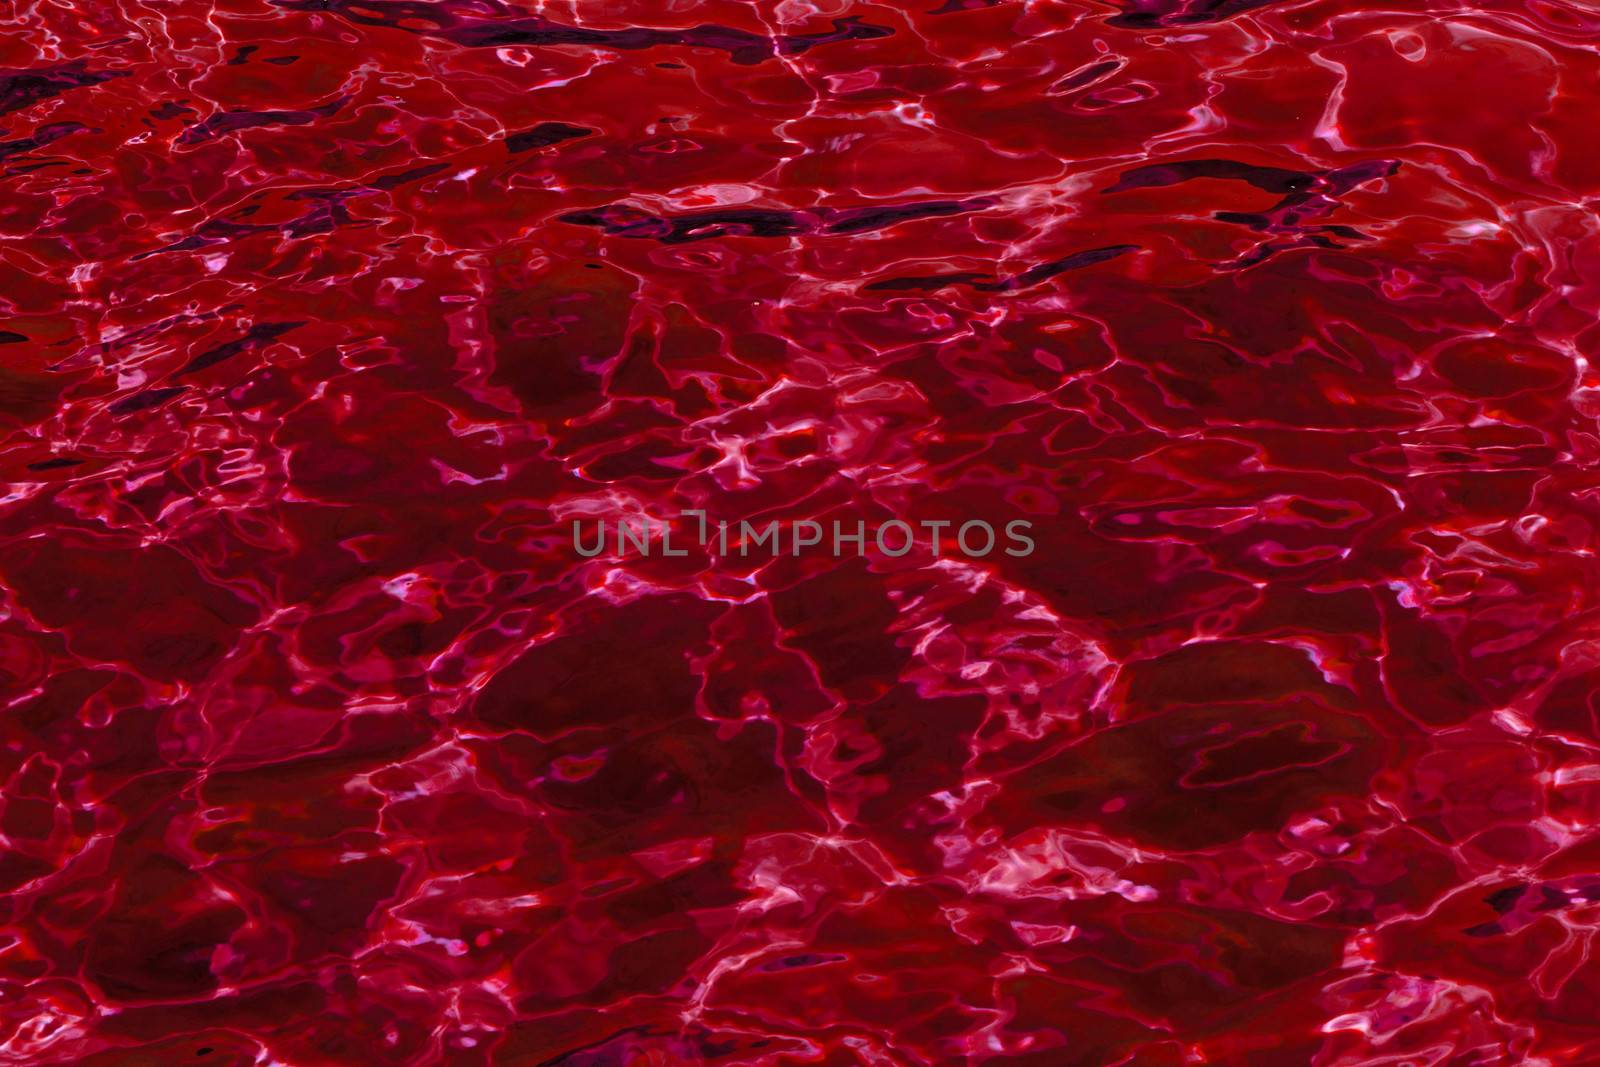 red abstract background of wavy water surface